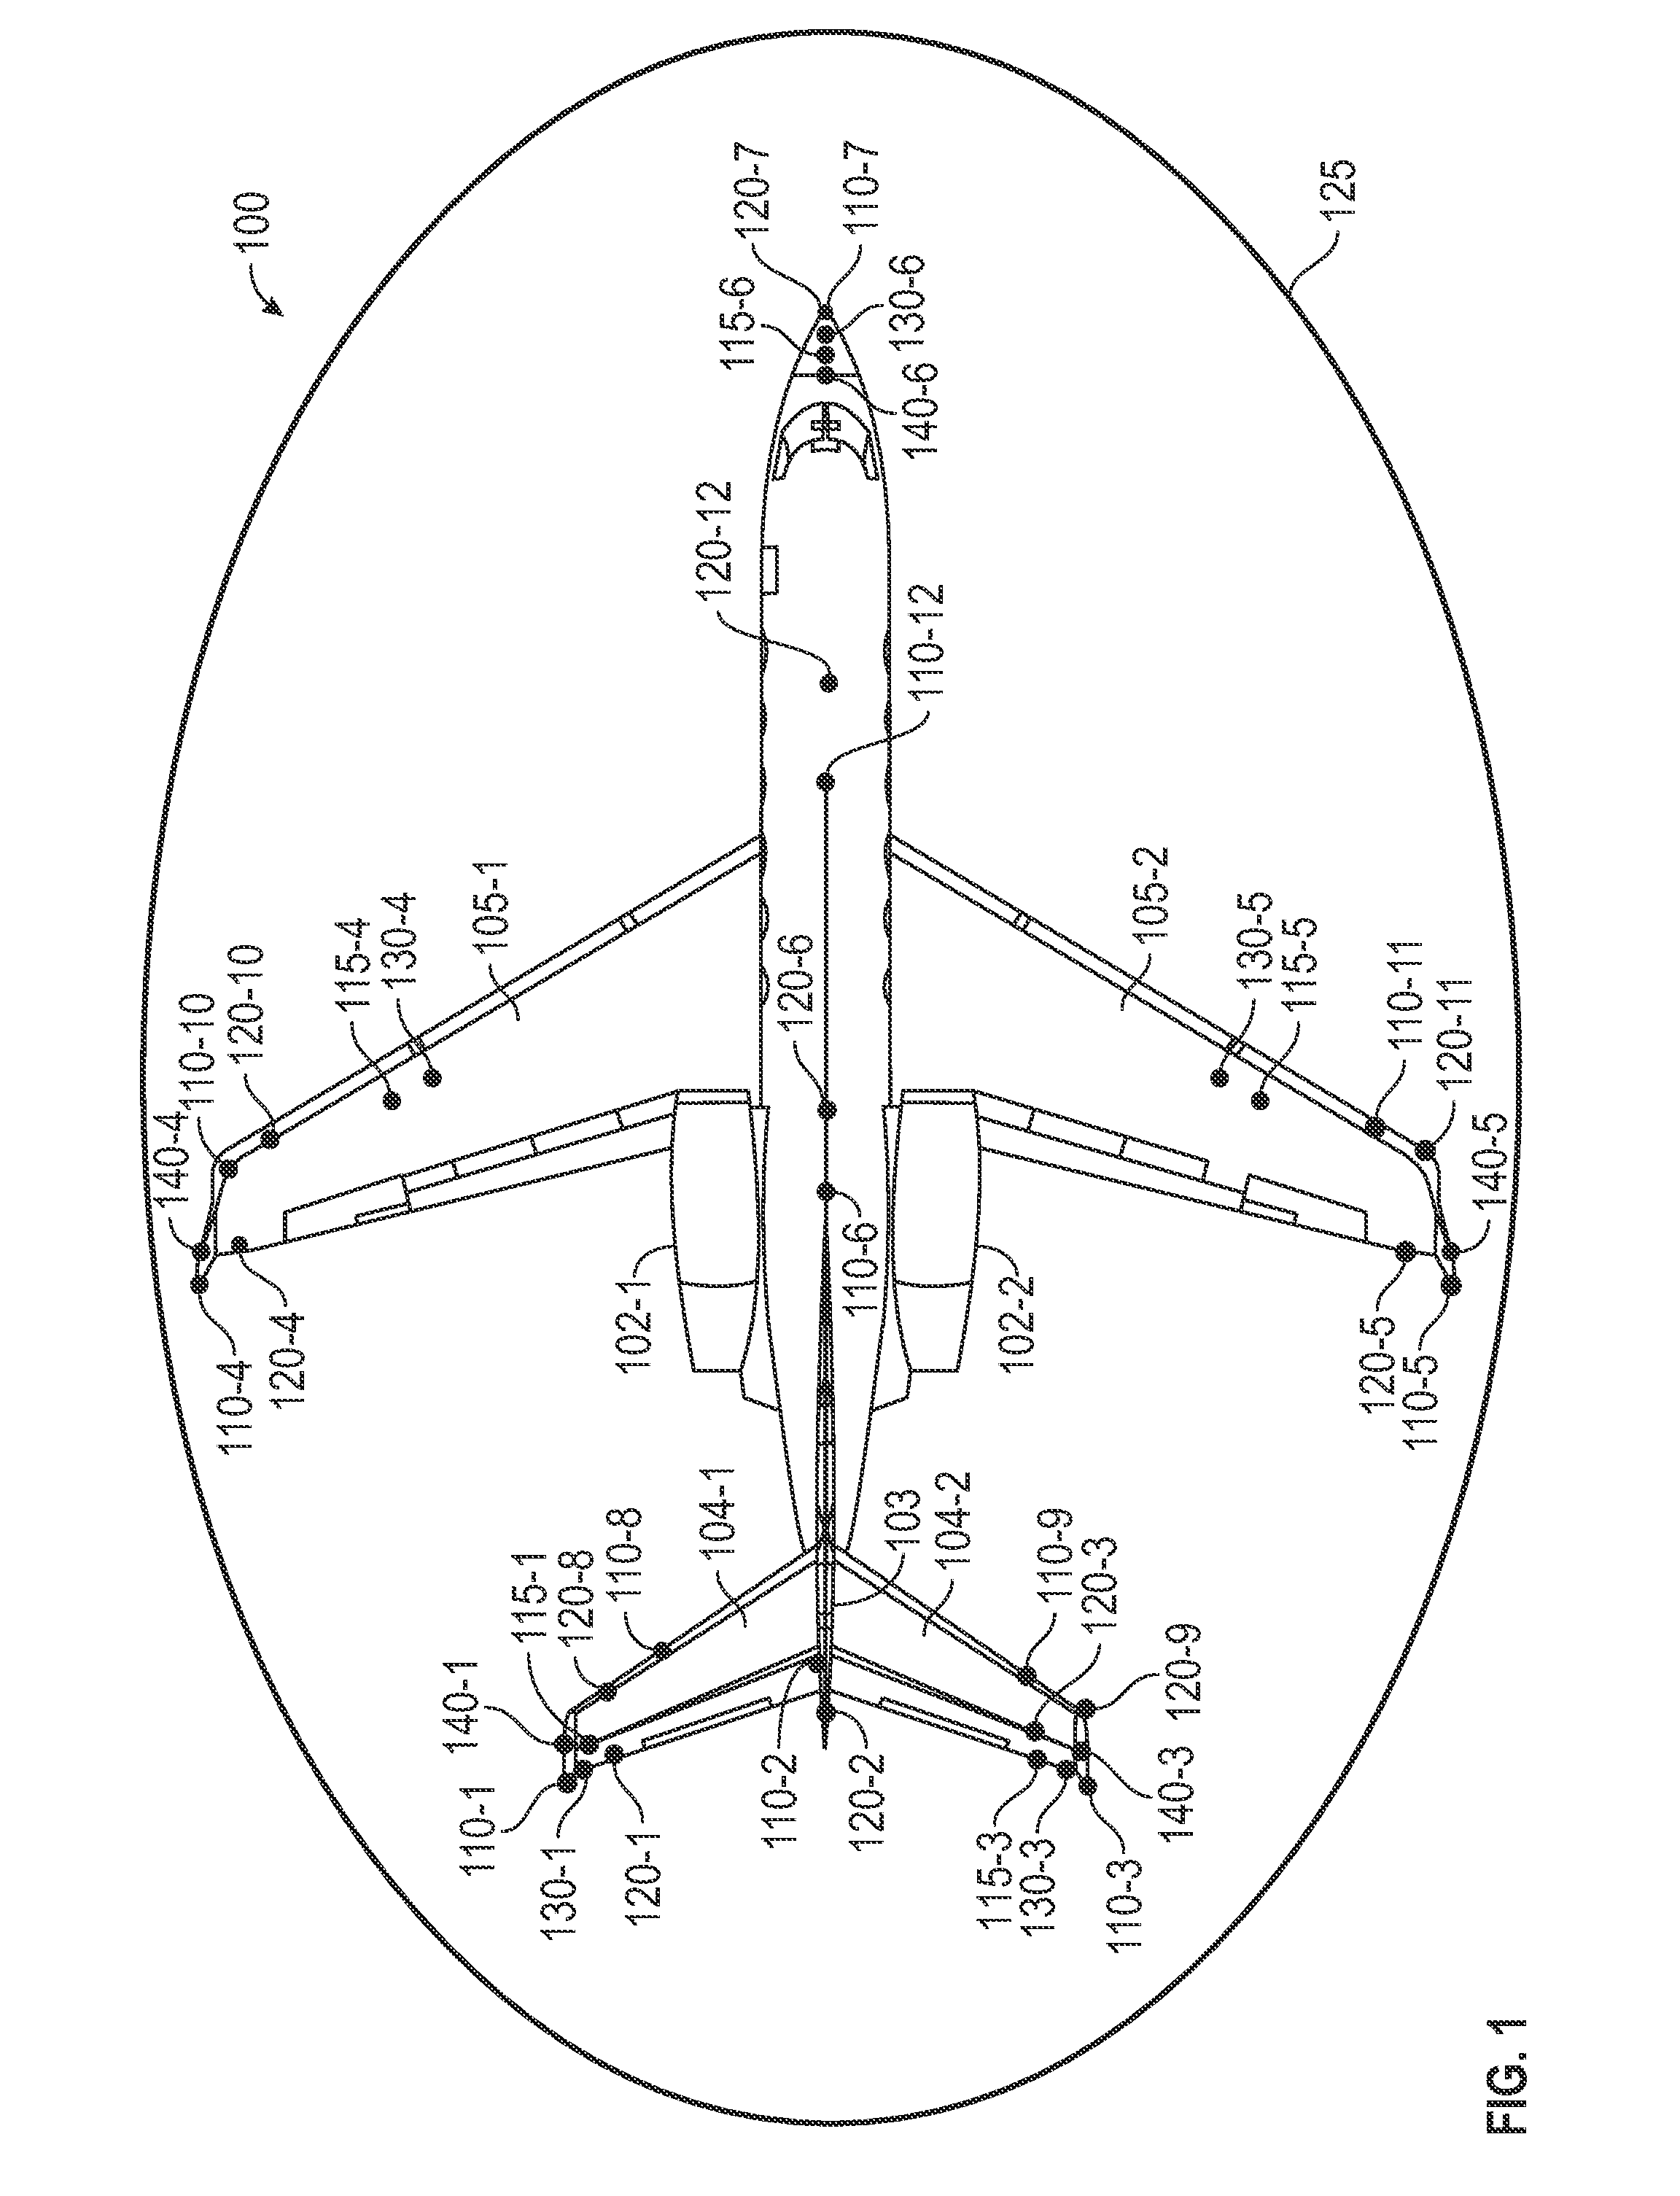 Methods and systems for monitoring, recording and/or reporting incidents in proximity of an aircraft